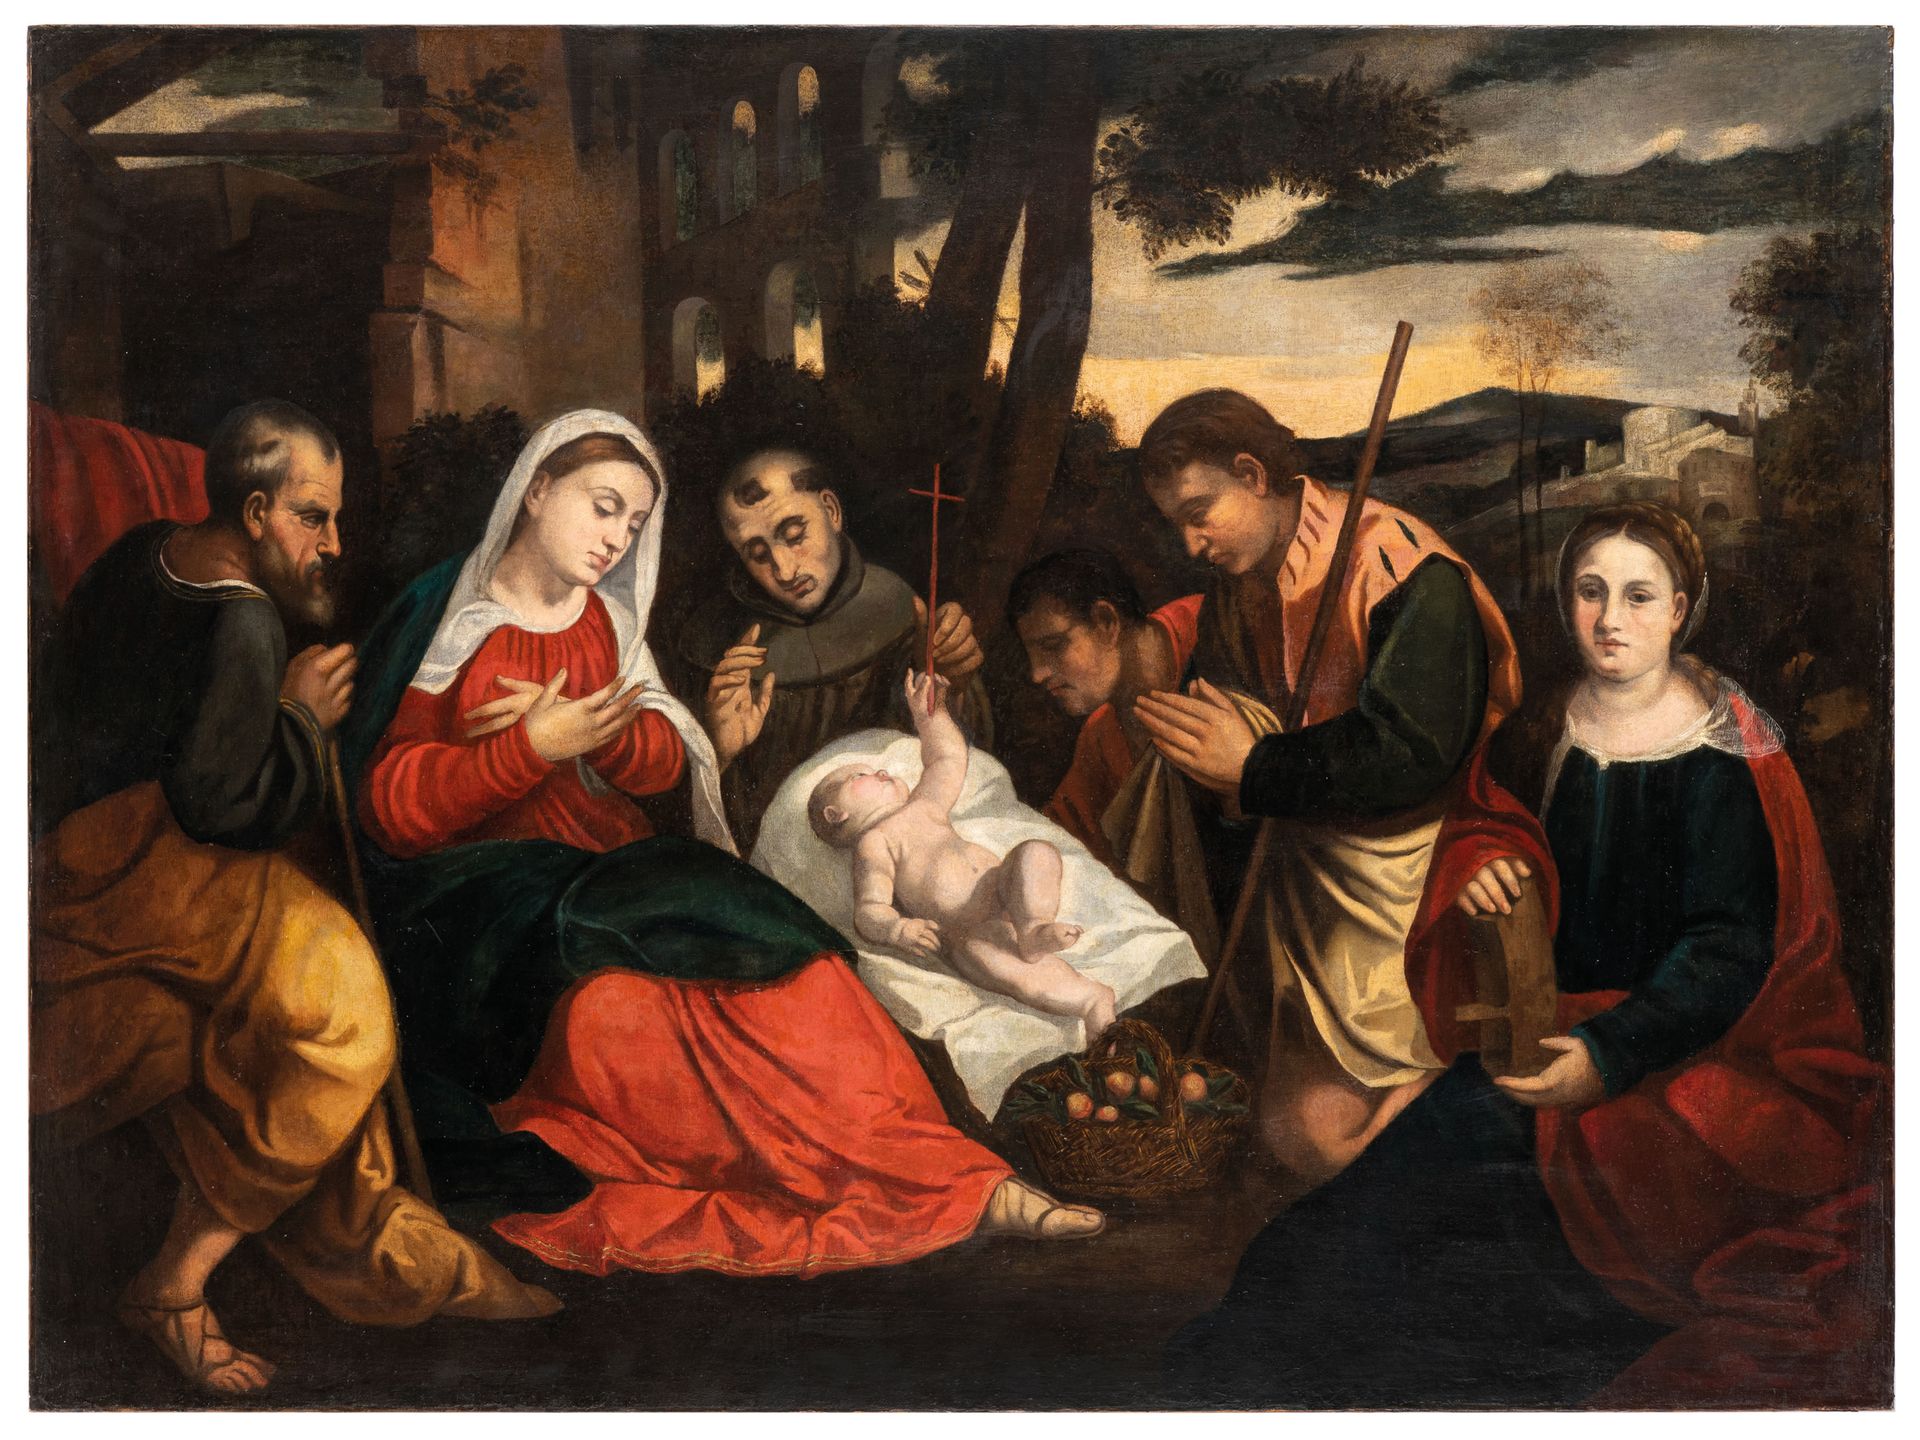 PITTORE DEL XVII SECOLO Adoration of the Shepherds
Oil on canvas, 125X168 cm

Th&hellip;